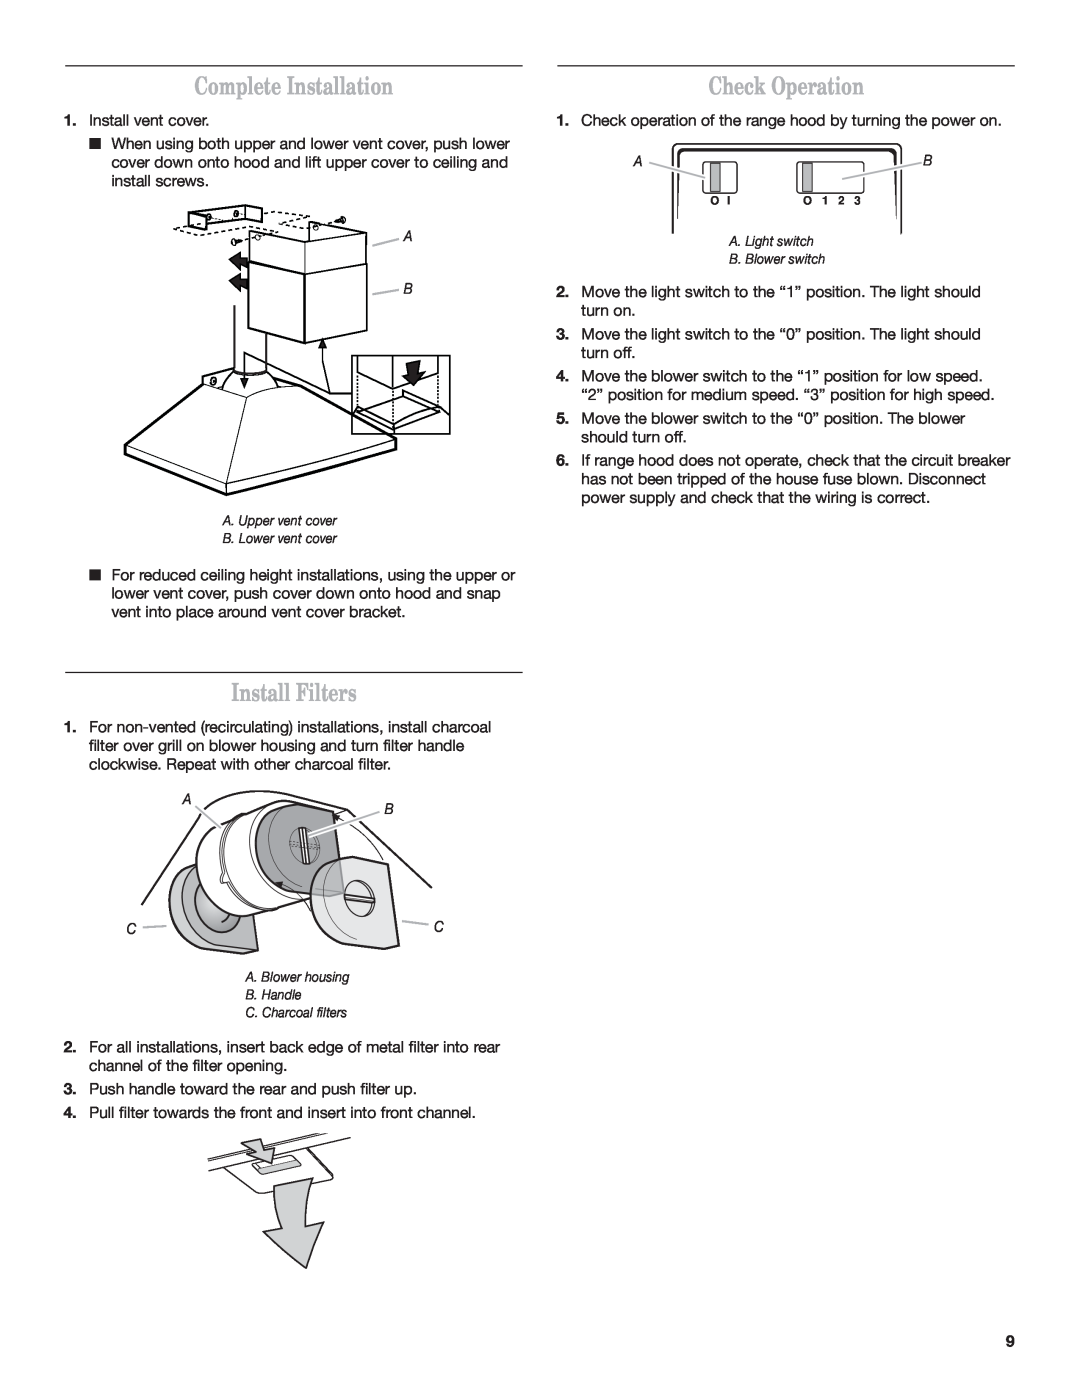 Whirlpool 9760266 installation instructions Complete Installation, Install Filters, Check Operation 